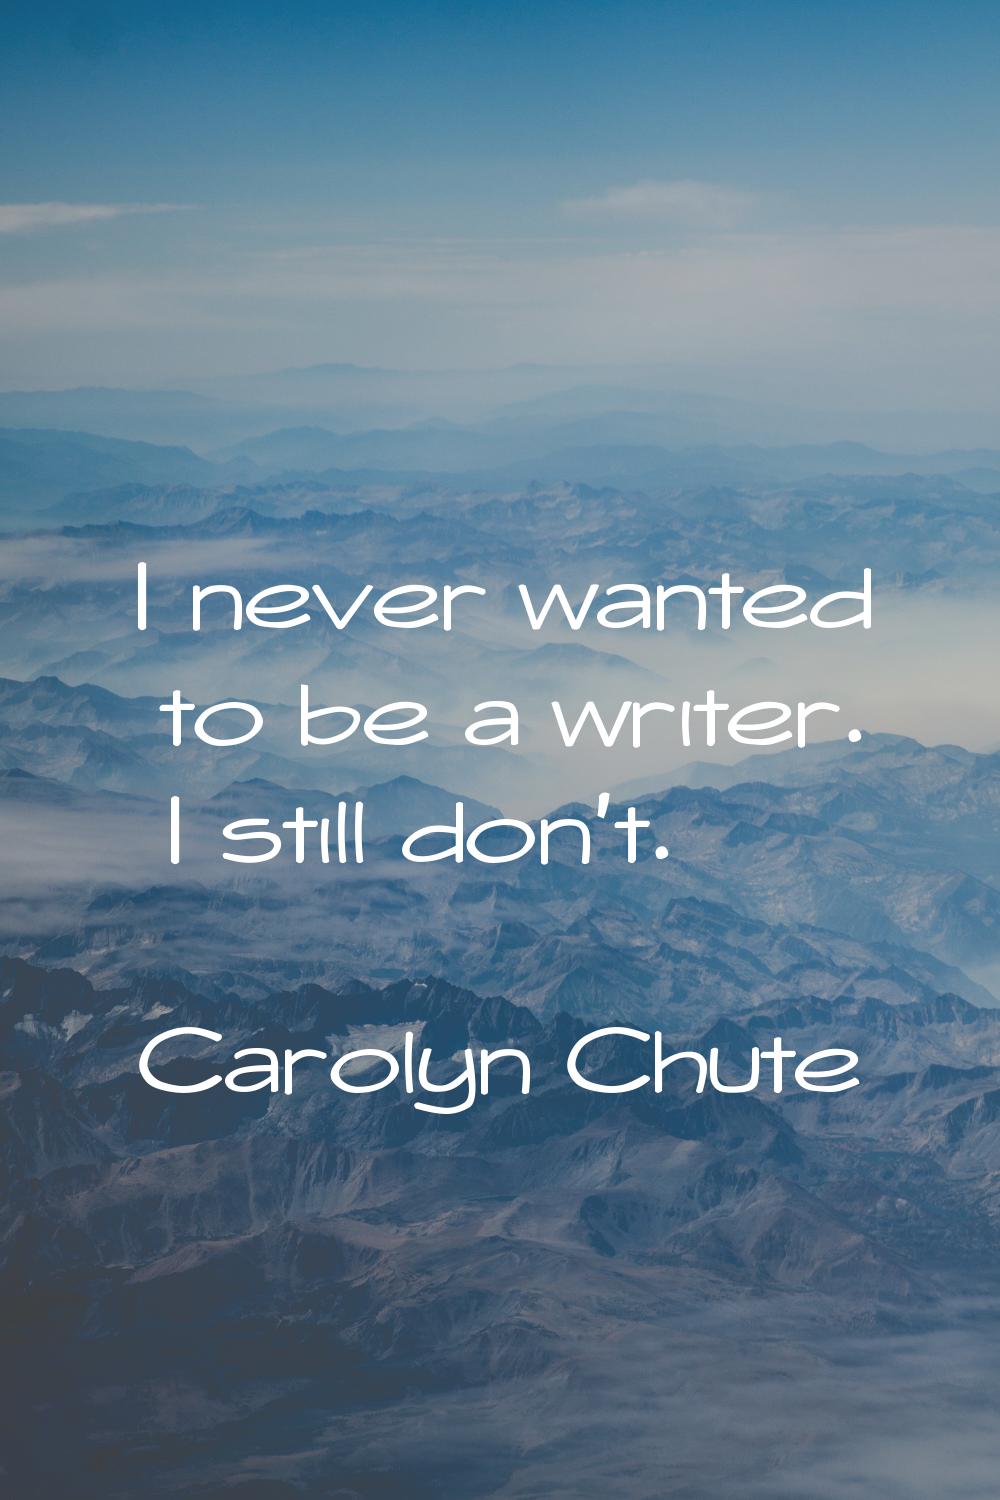 I never wanted to be a writer. I still don't.